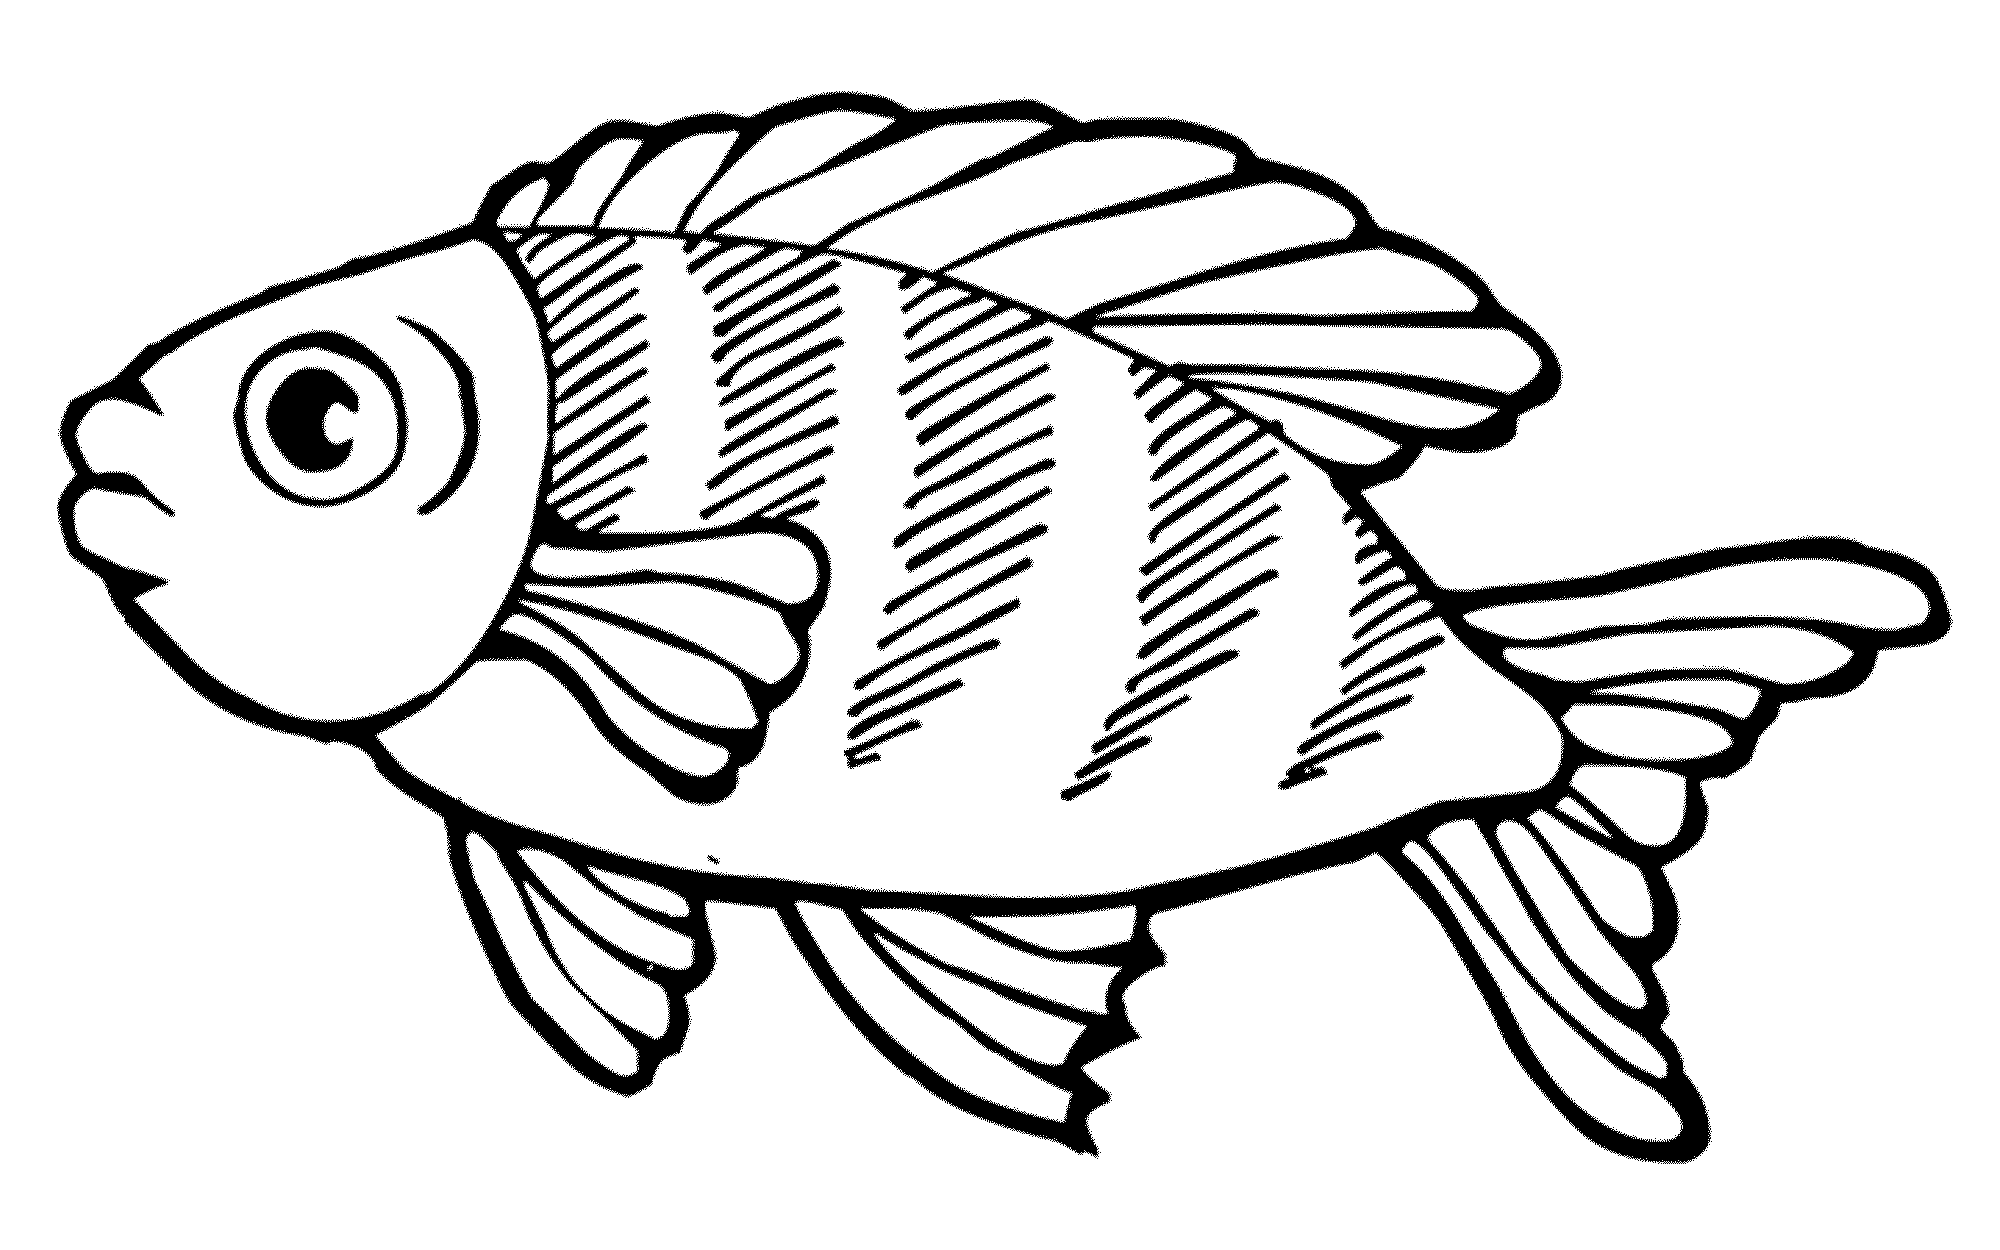 fish image colouring page